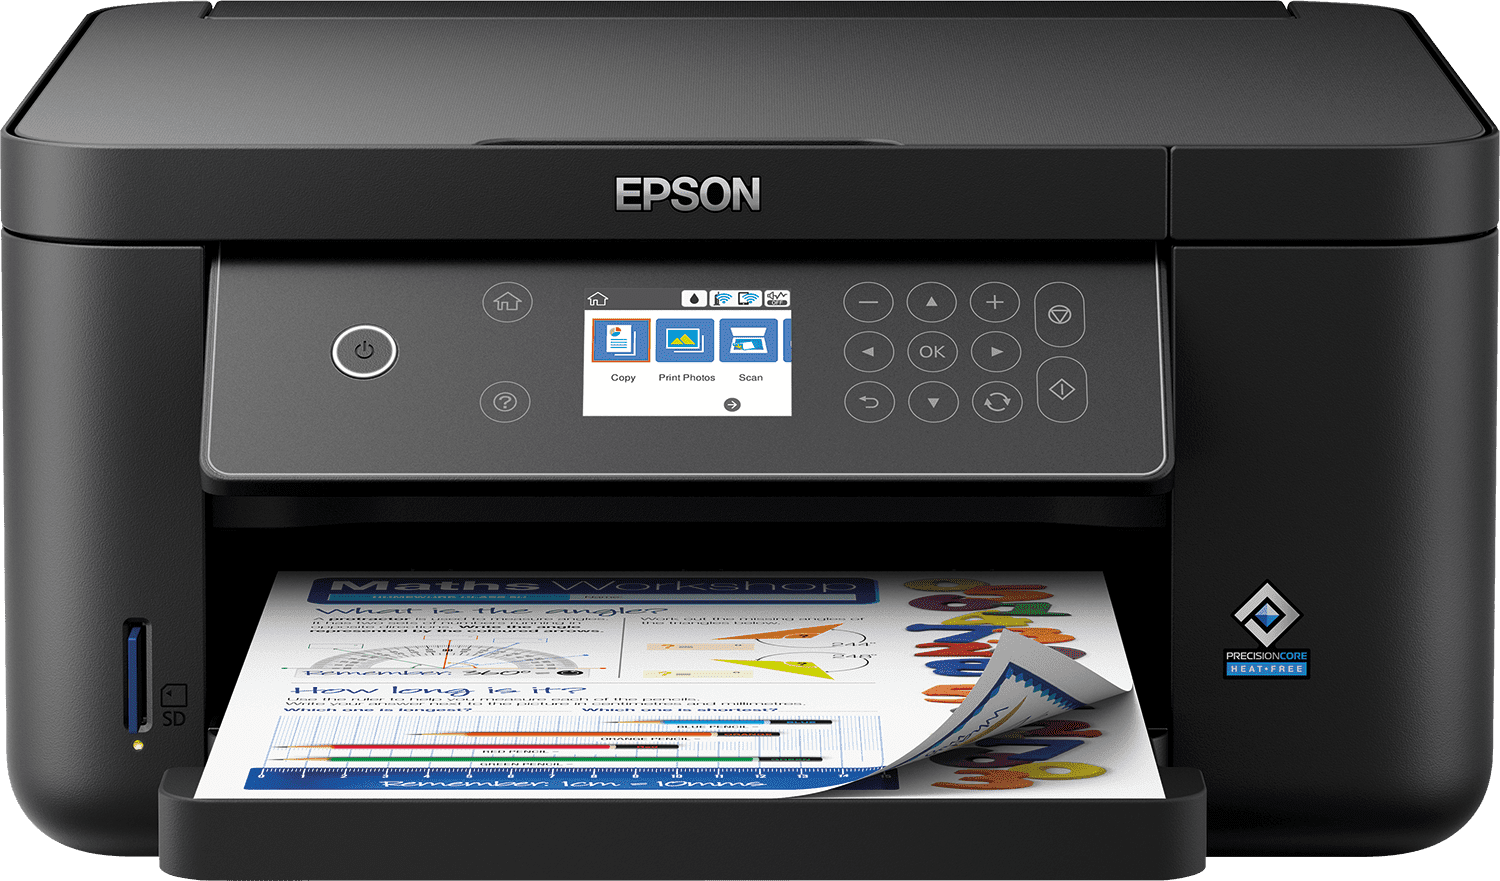 Epson Multifunktionsdrucker Tinte Farbe Expression Home XP-5150